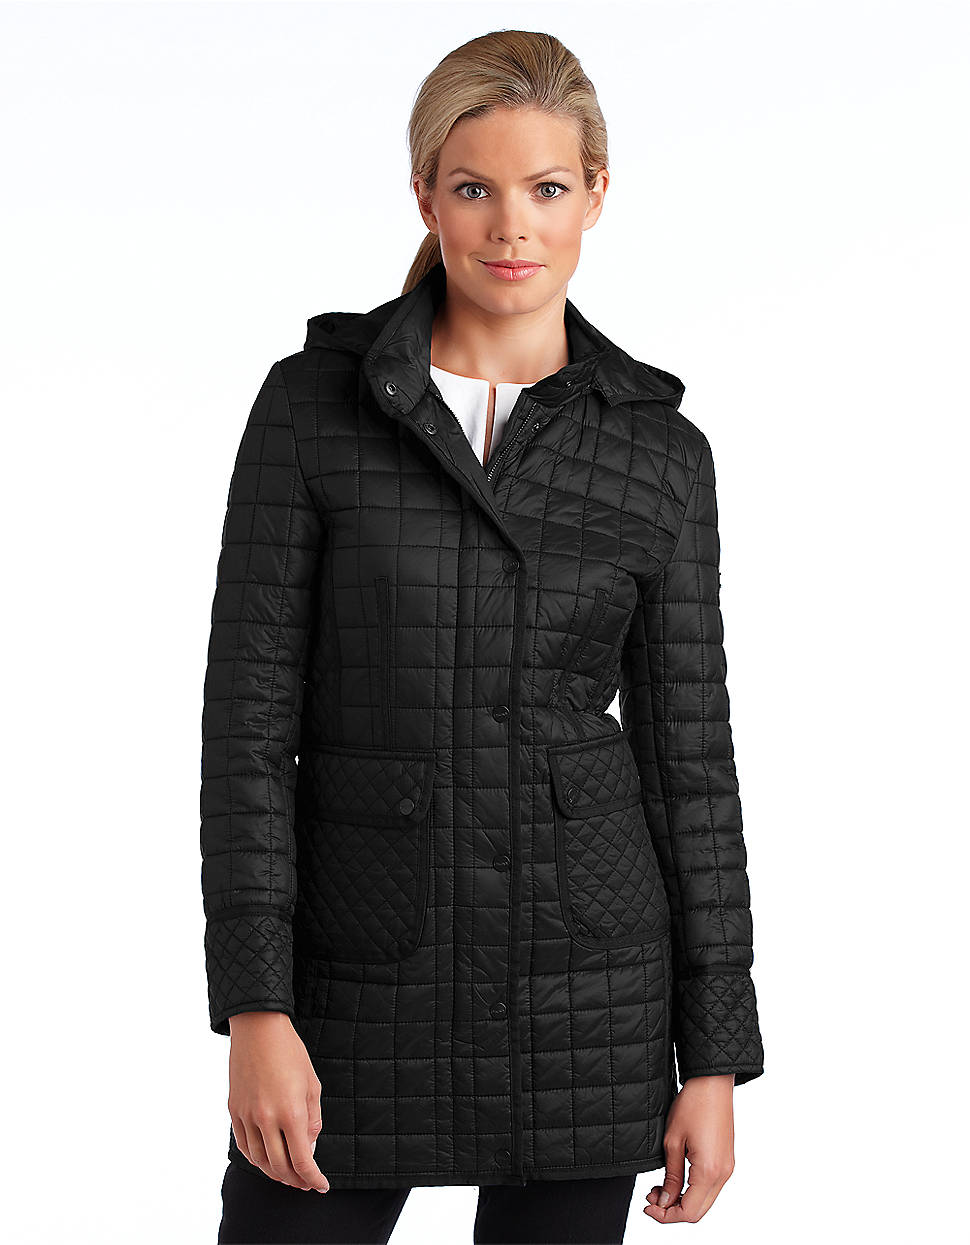 Dkny Quilted Barn Jacket with Detachable Hood in Black | Lyst